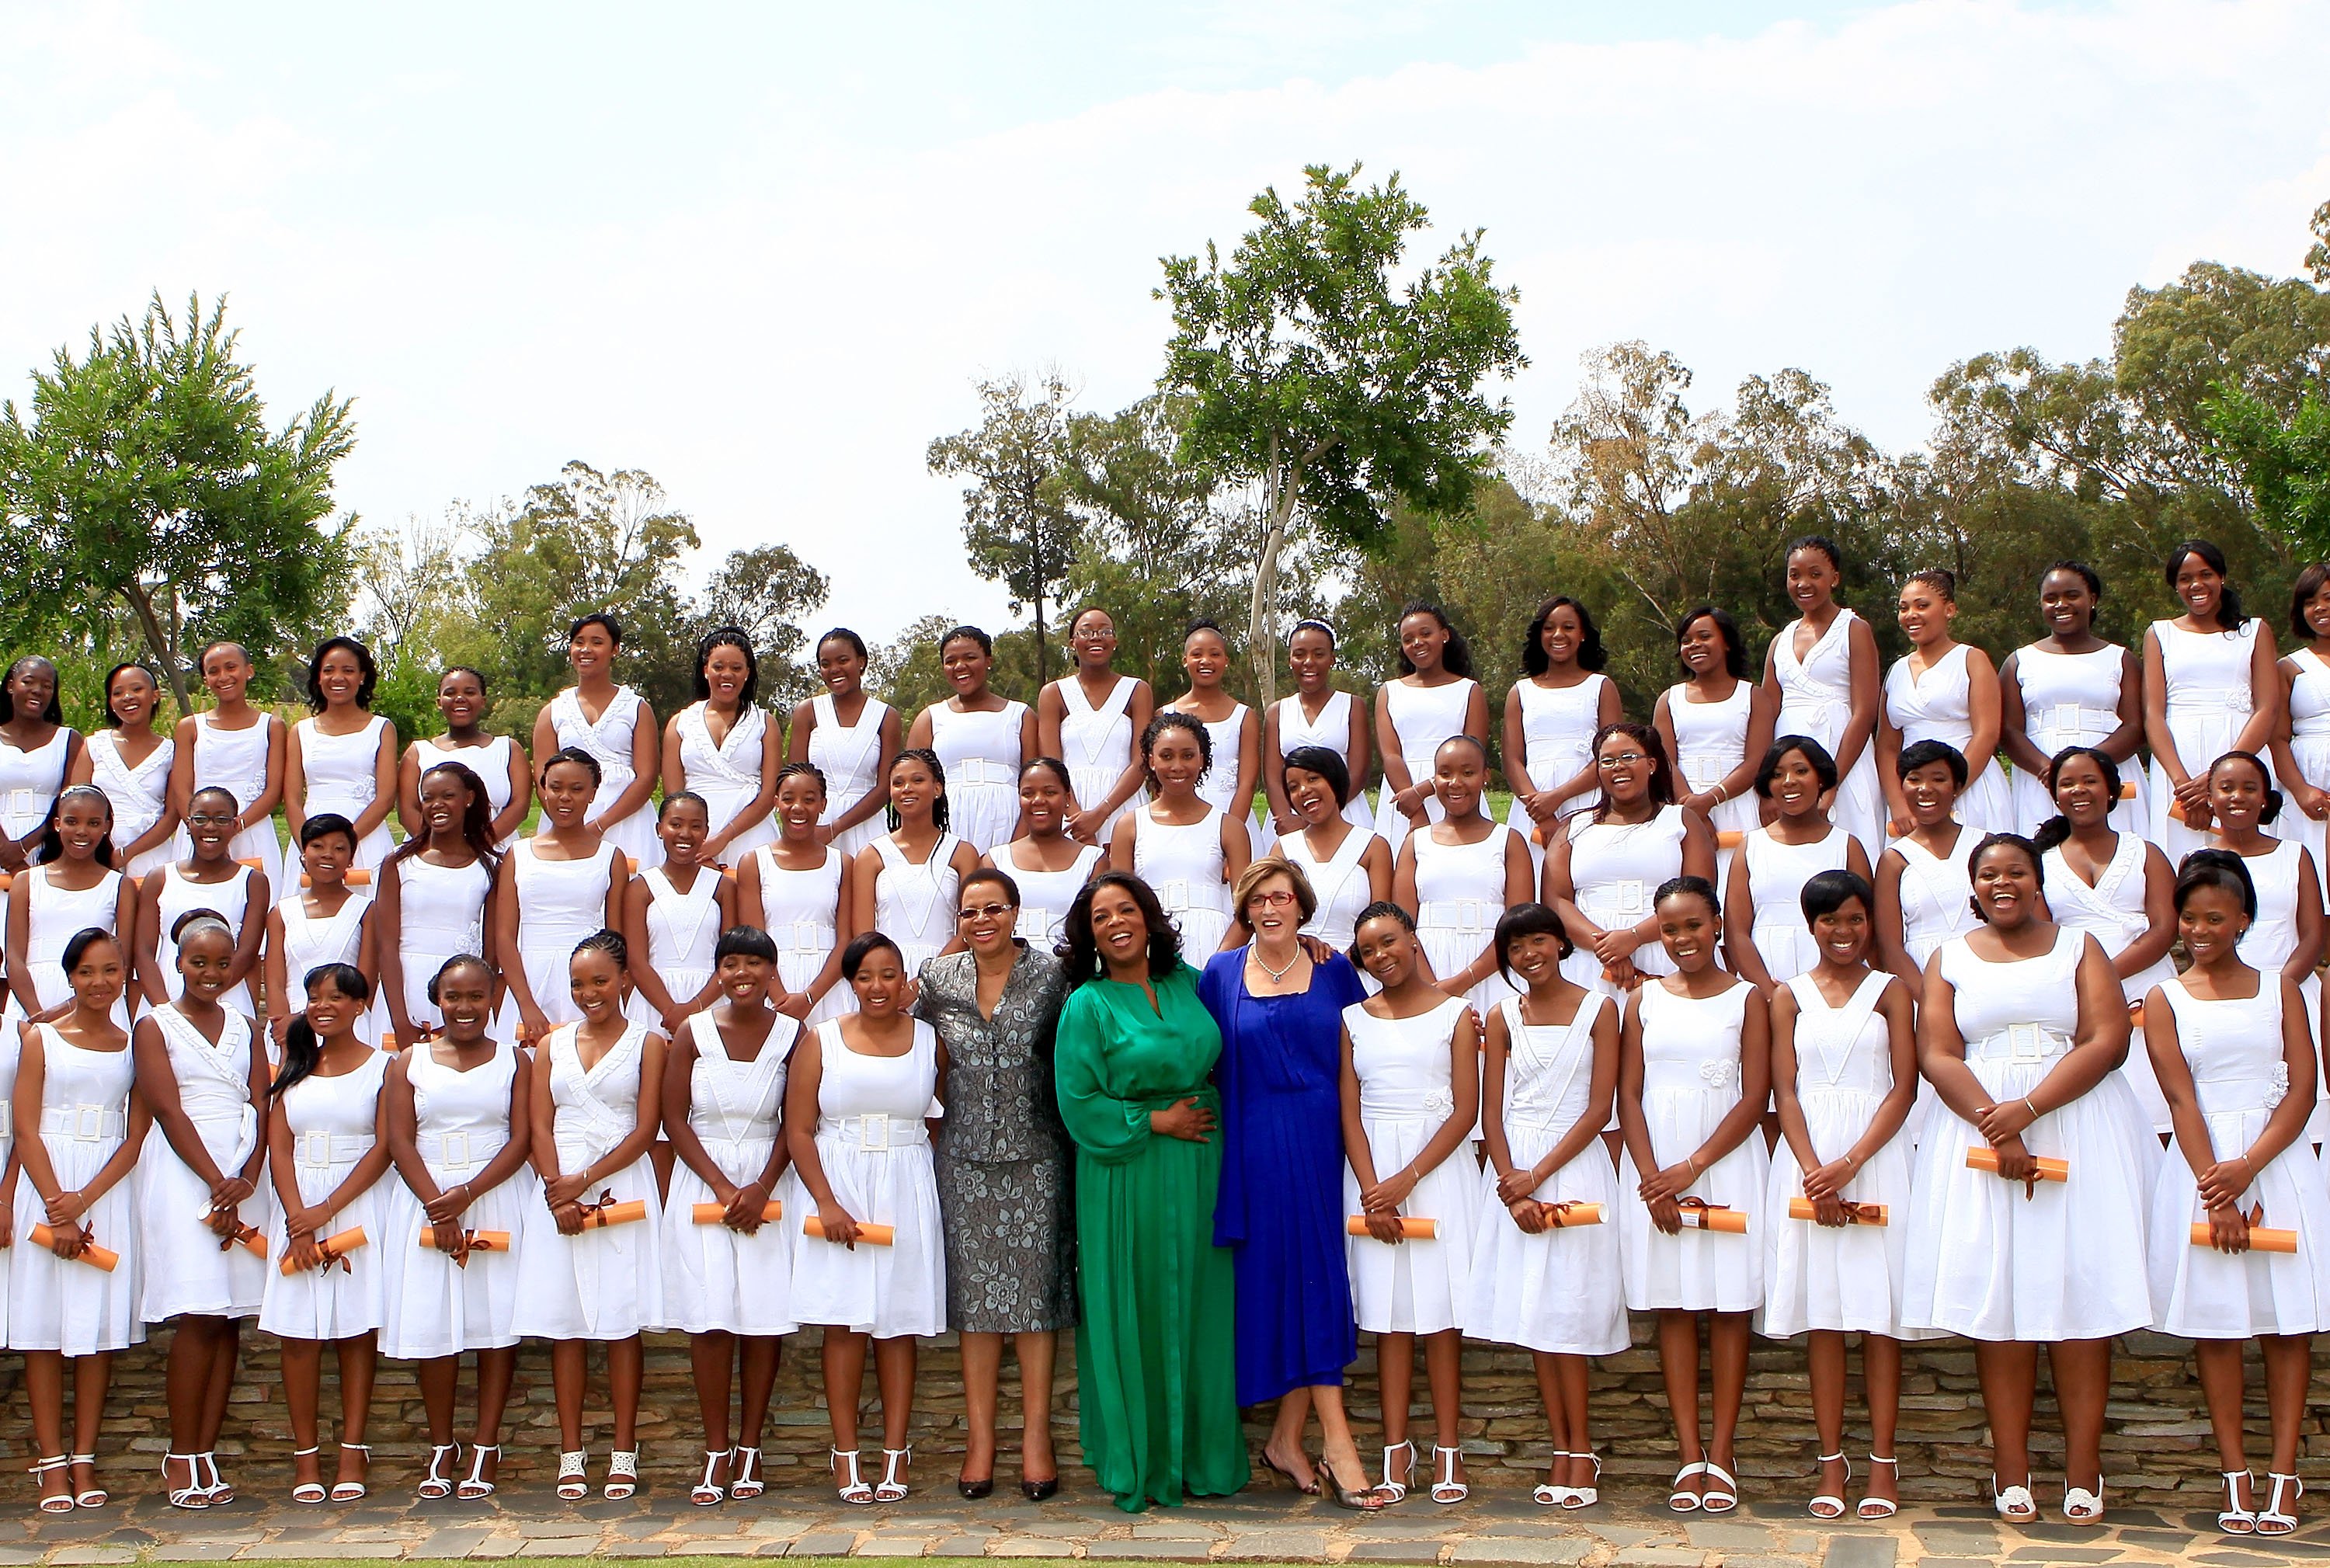 Oprah Winfrey poses with the Graduates on her arrival at the inaugural graduation of the class of 2011 at Oprah Winfrey Leadership Academy for Girls on January 14, 2012 in Henley on Klip, South Africa | Source: Getty Images